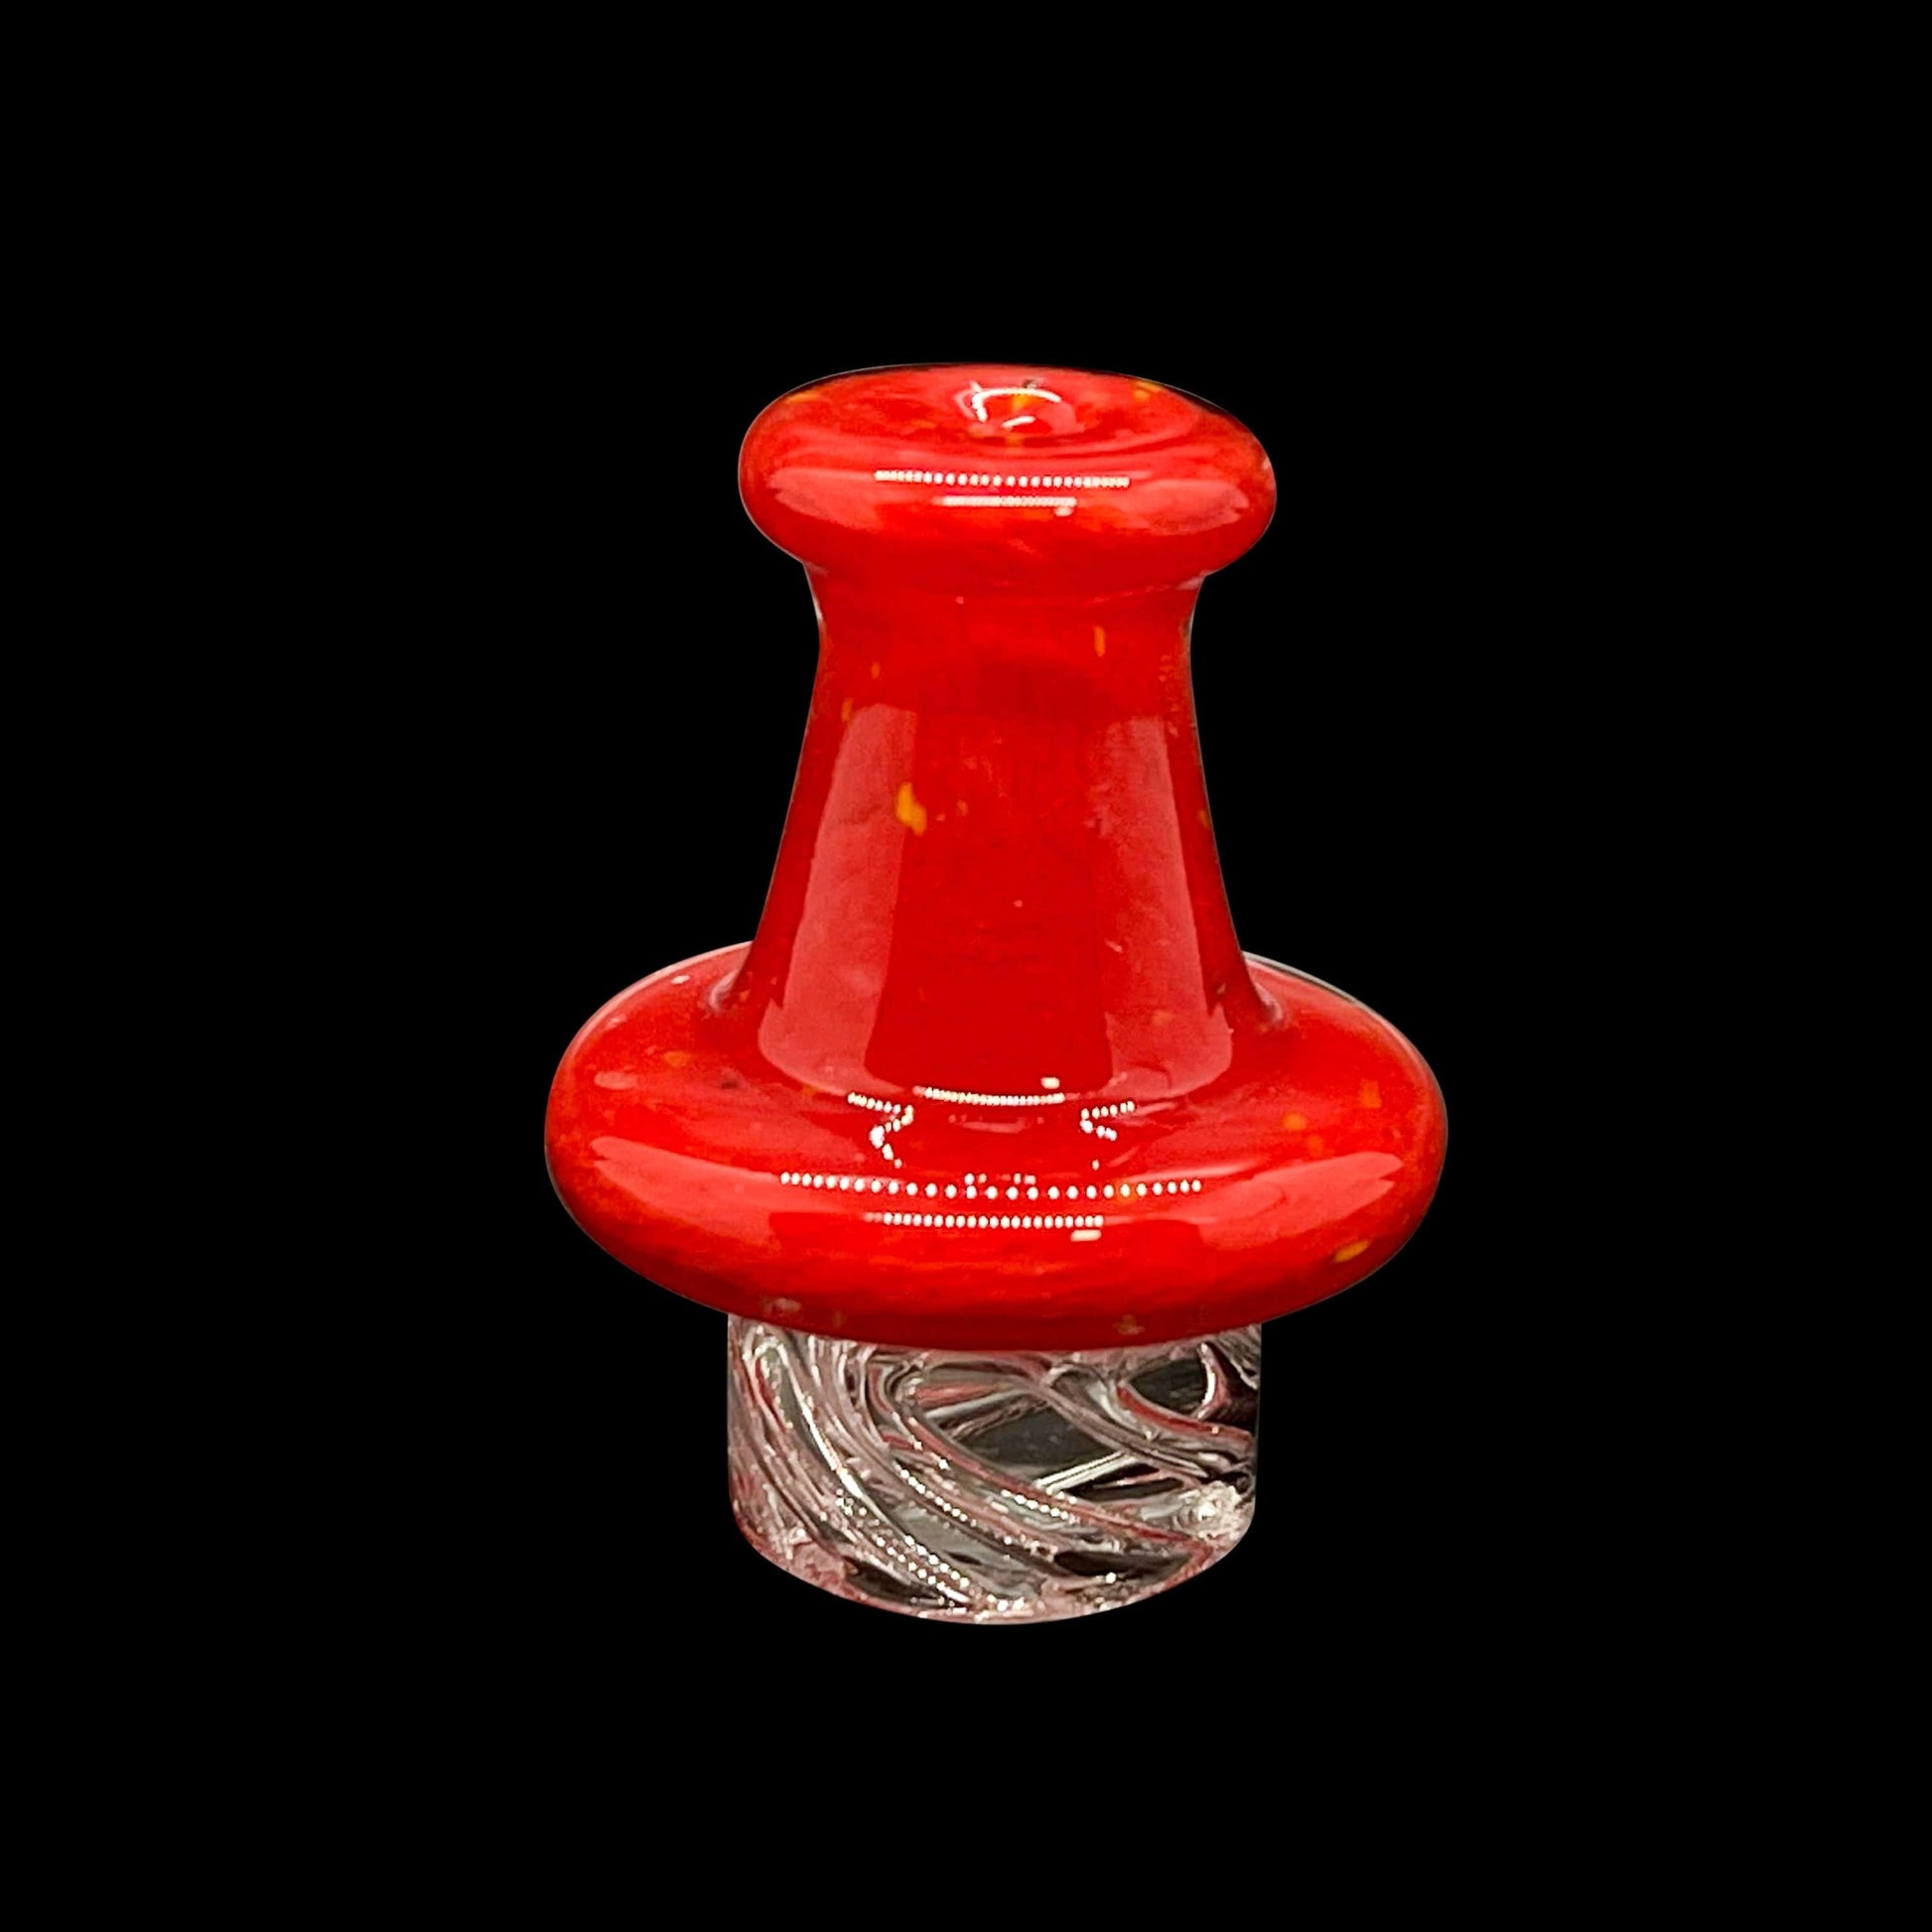 On Point Smoke - Wild Cherry N Silo Spinning Carb Cap for 25mm Quartz Bangers - OPS.com